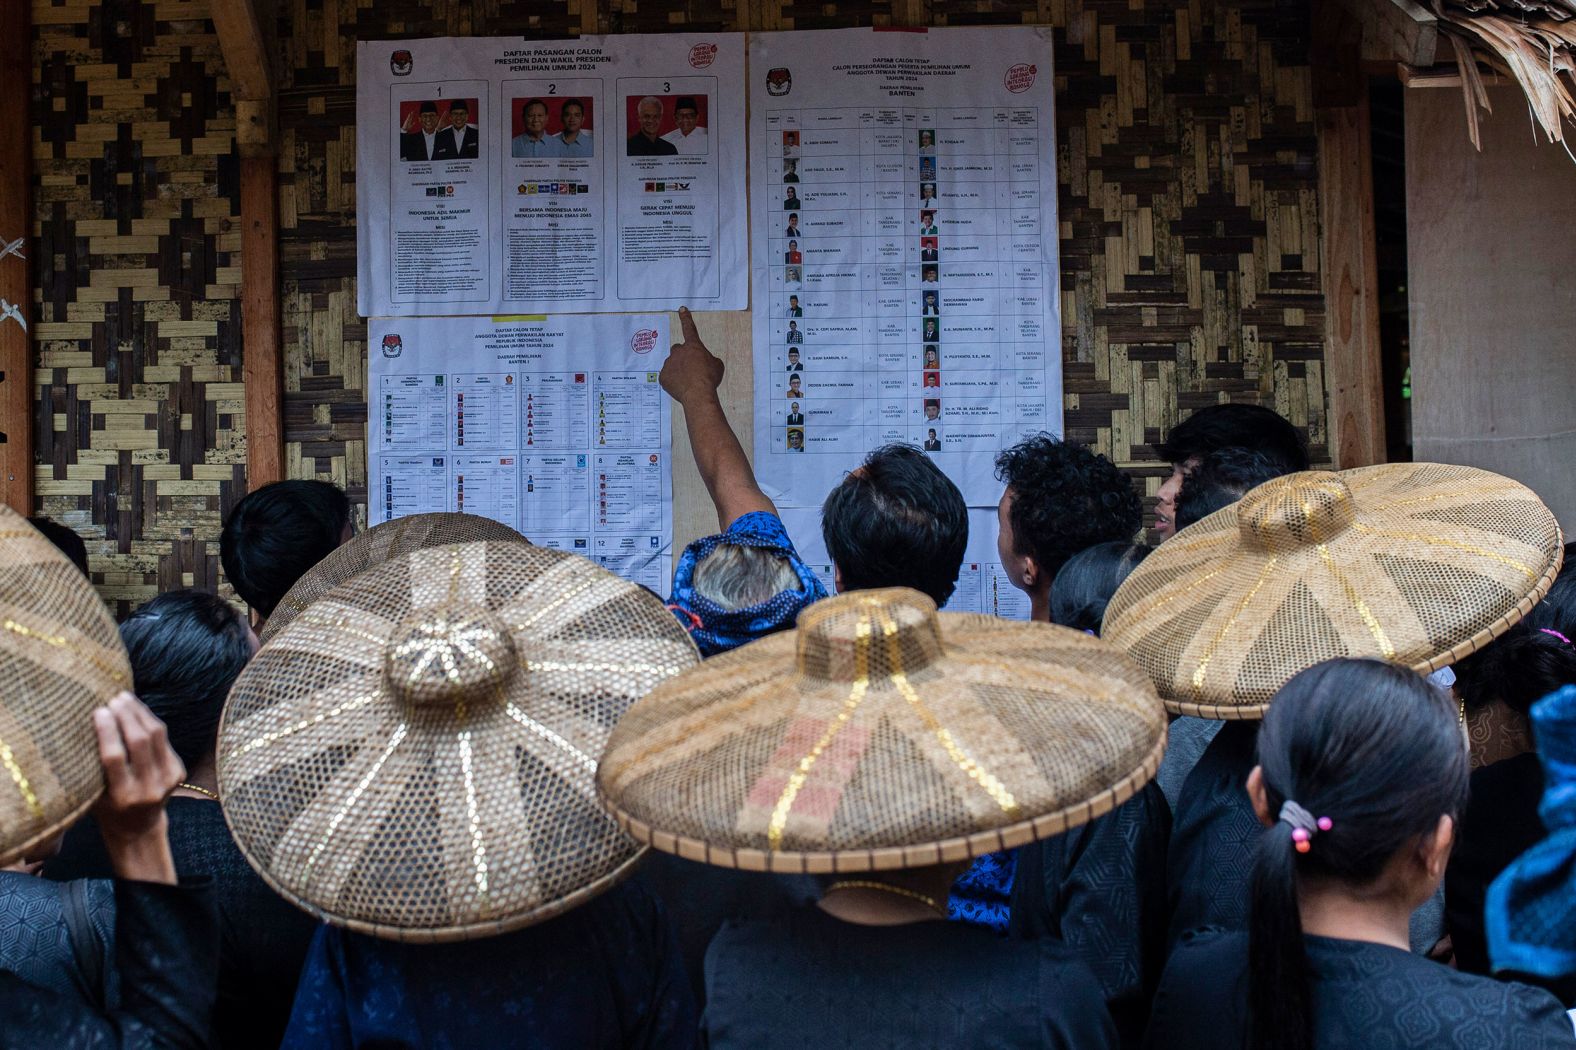 Members of the indigenous Baduy tribe check the candidates list in the Indonesian village of Kanekes before casting their ballot during Indonesia's presidential and legislative elections on Wednesday, February 14.